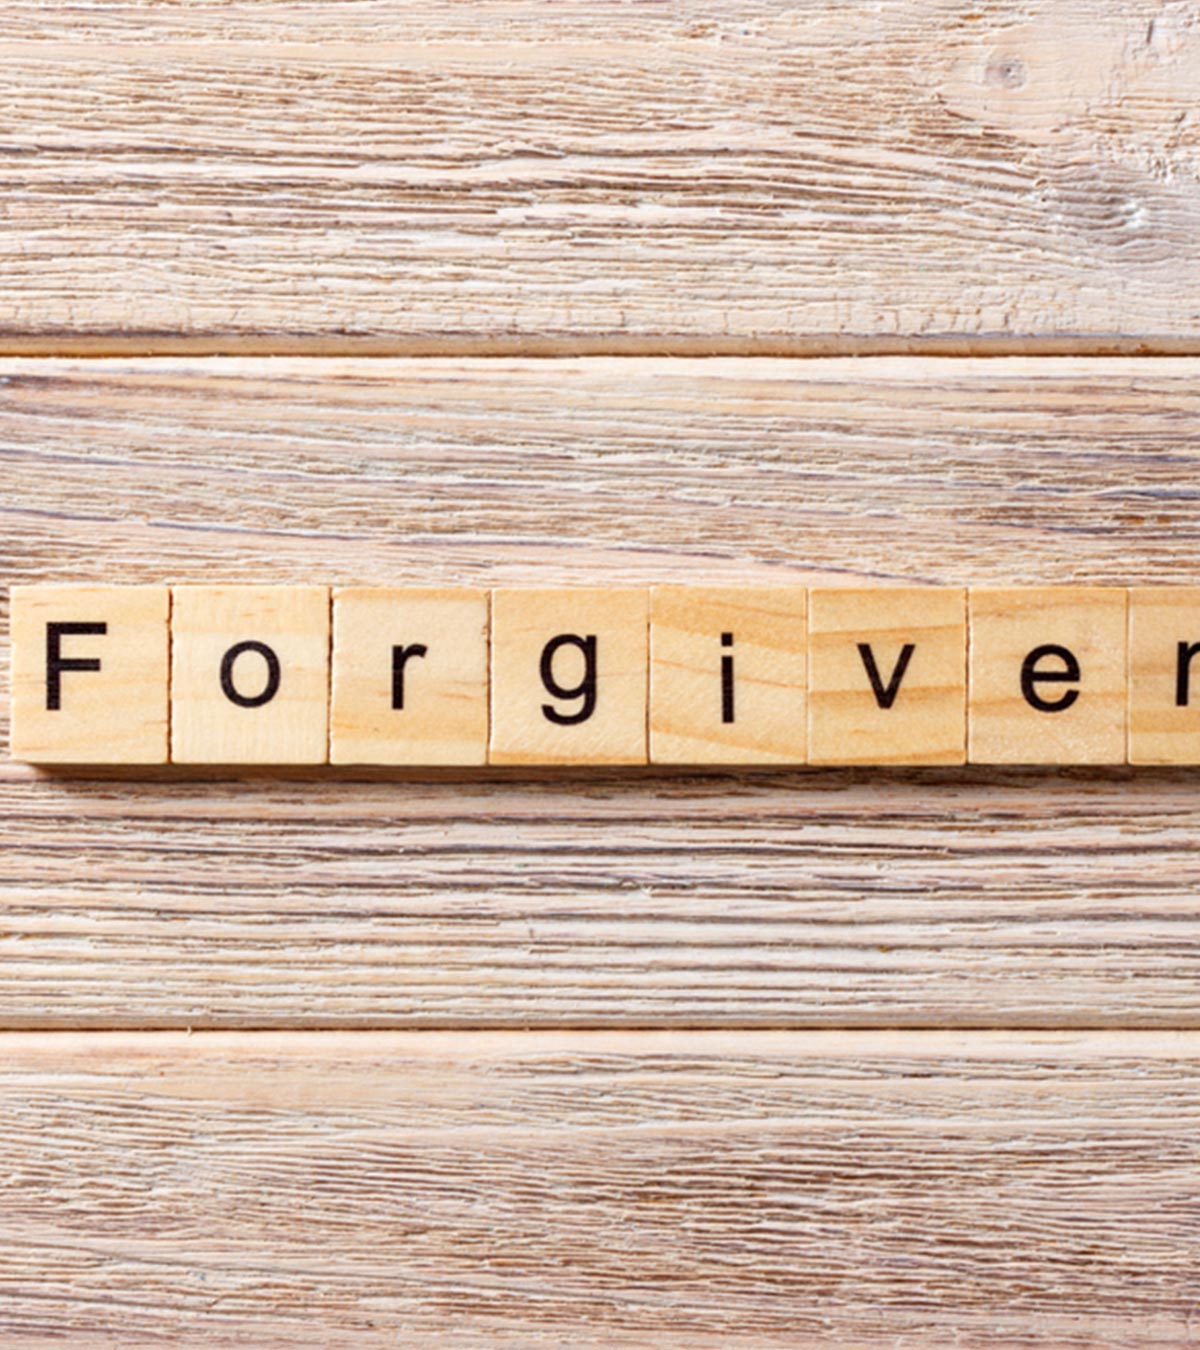 23 Forgiveness Poems That Will Change Your Outlook On Life